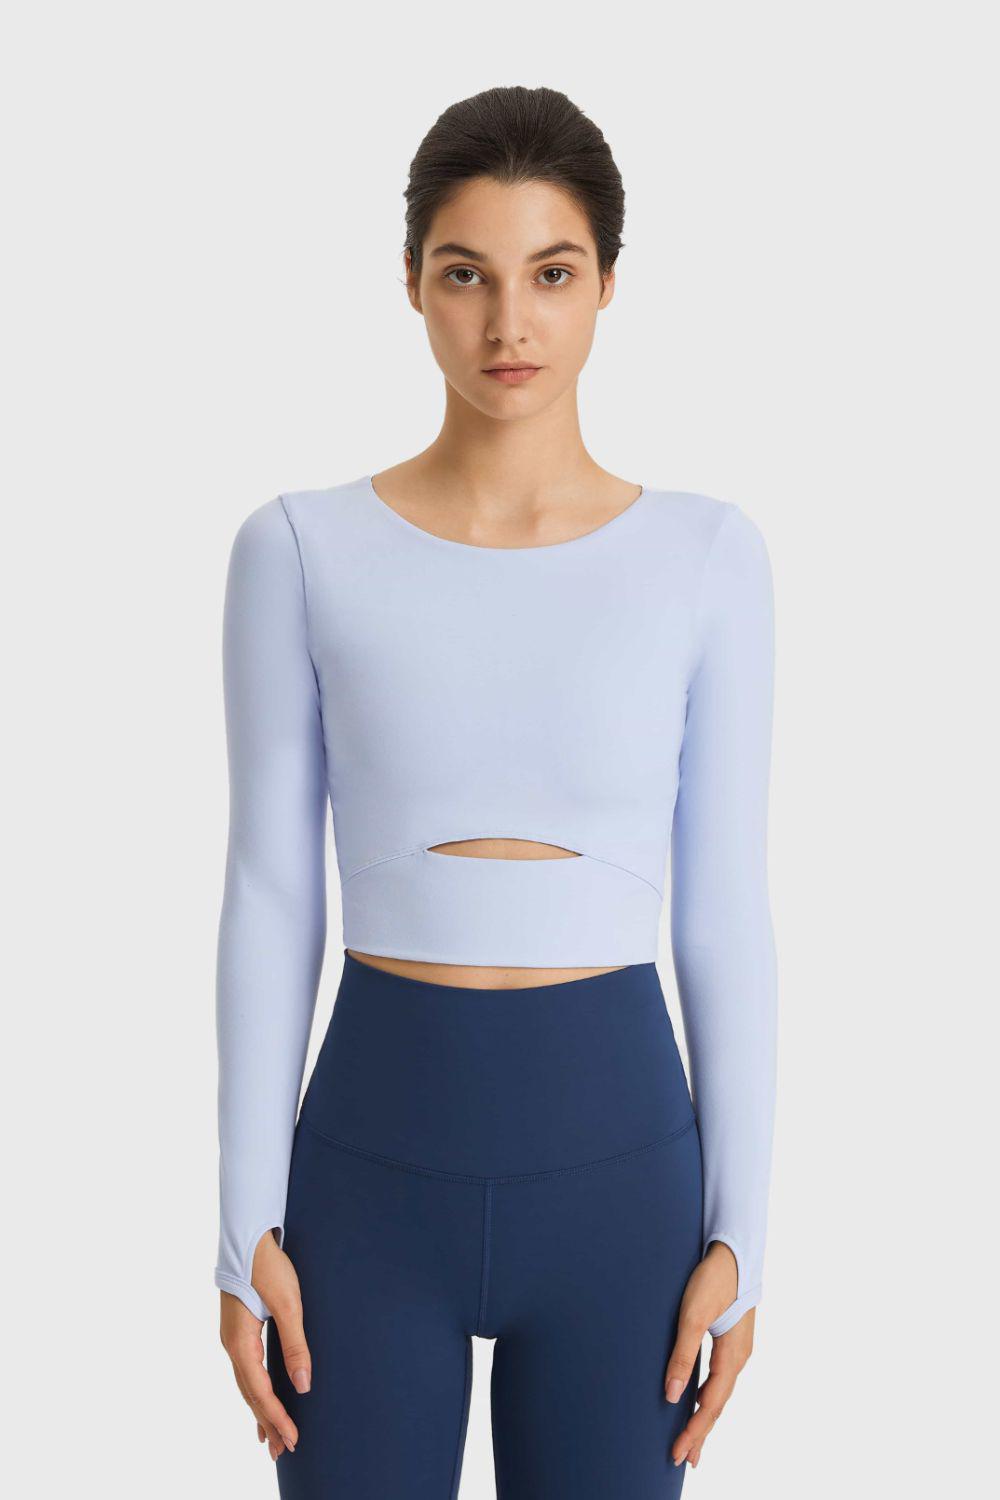 Cutout Long Sleeve Cropped Sports Top-TOPS / DRESSES-[Adult]-[Female]-Sky Blue-4-Blue Zone Planet